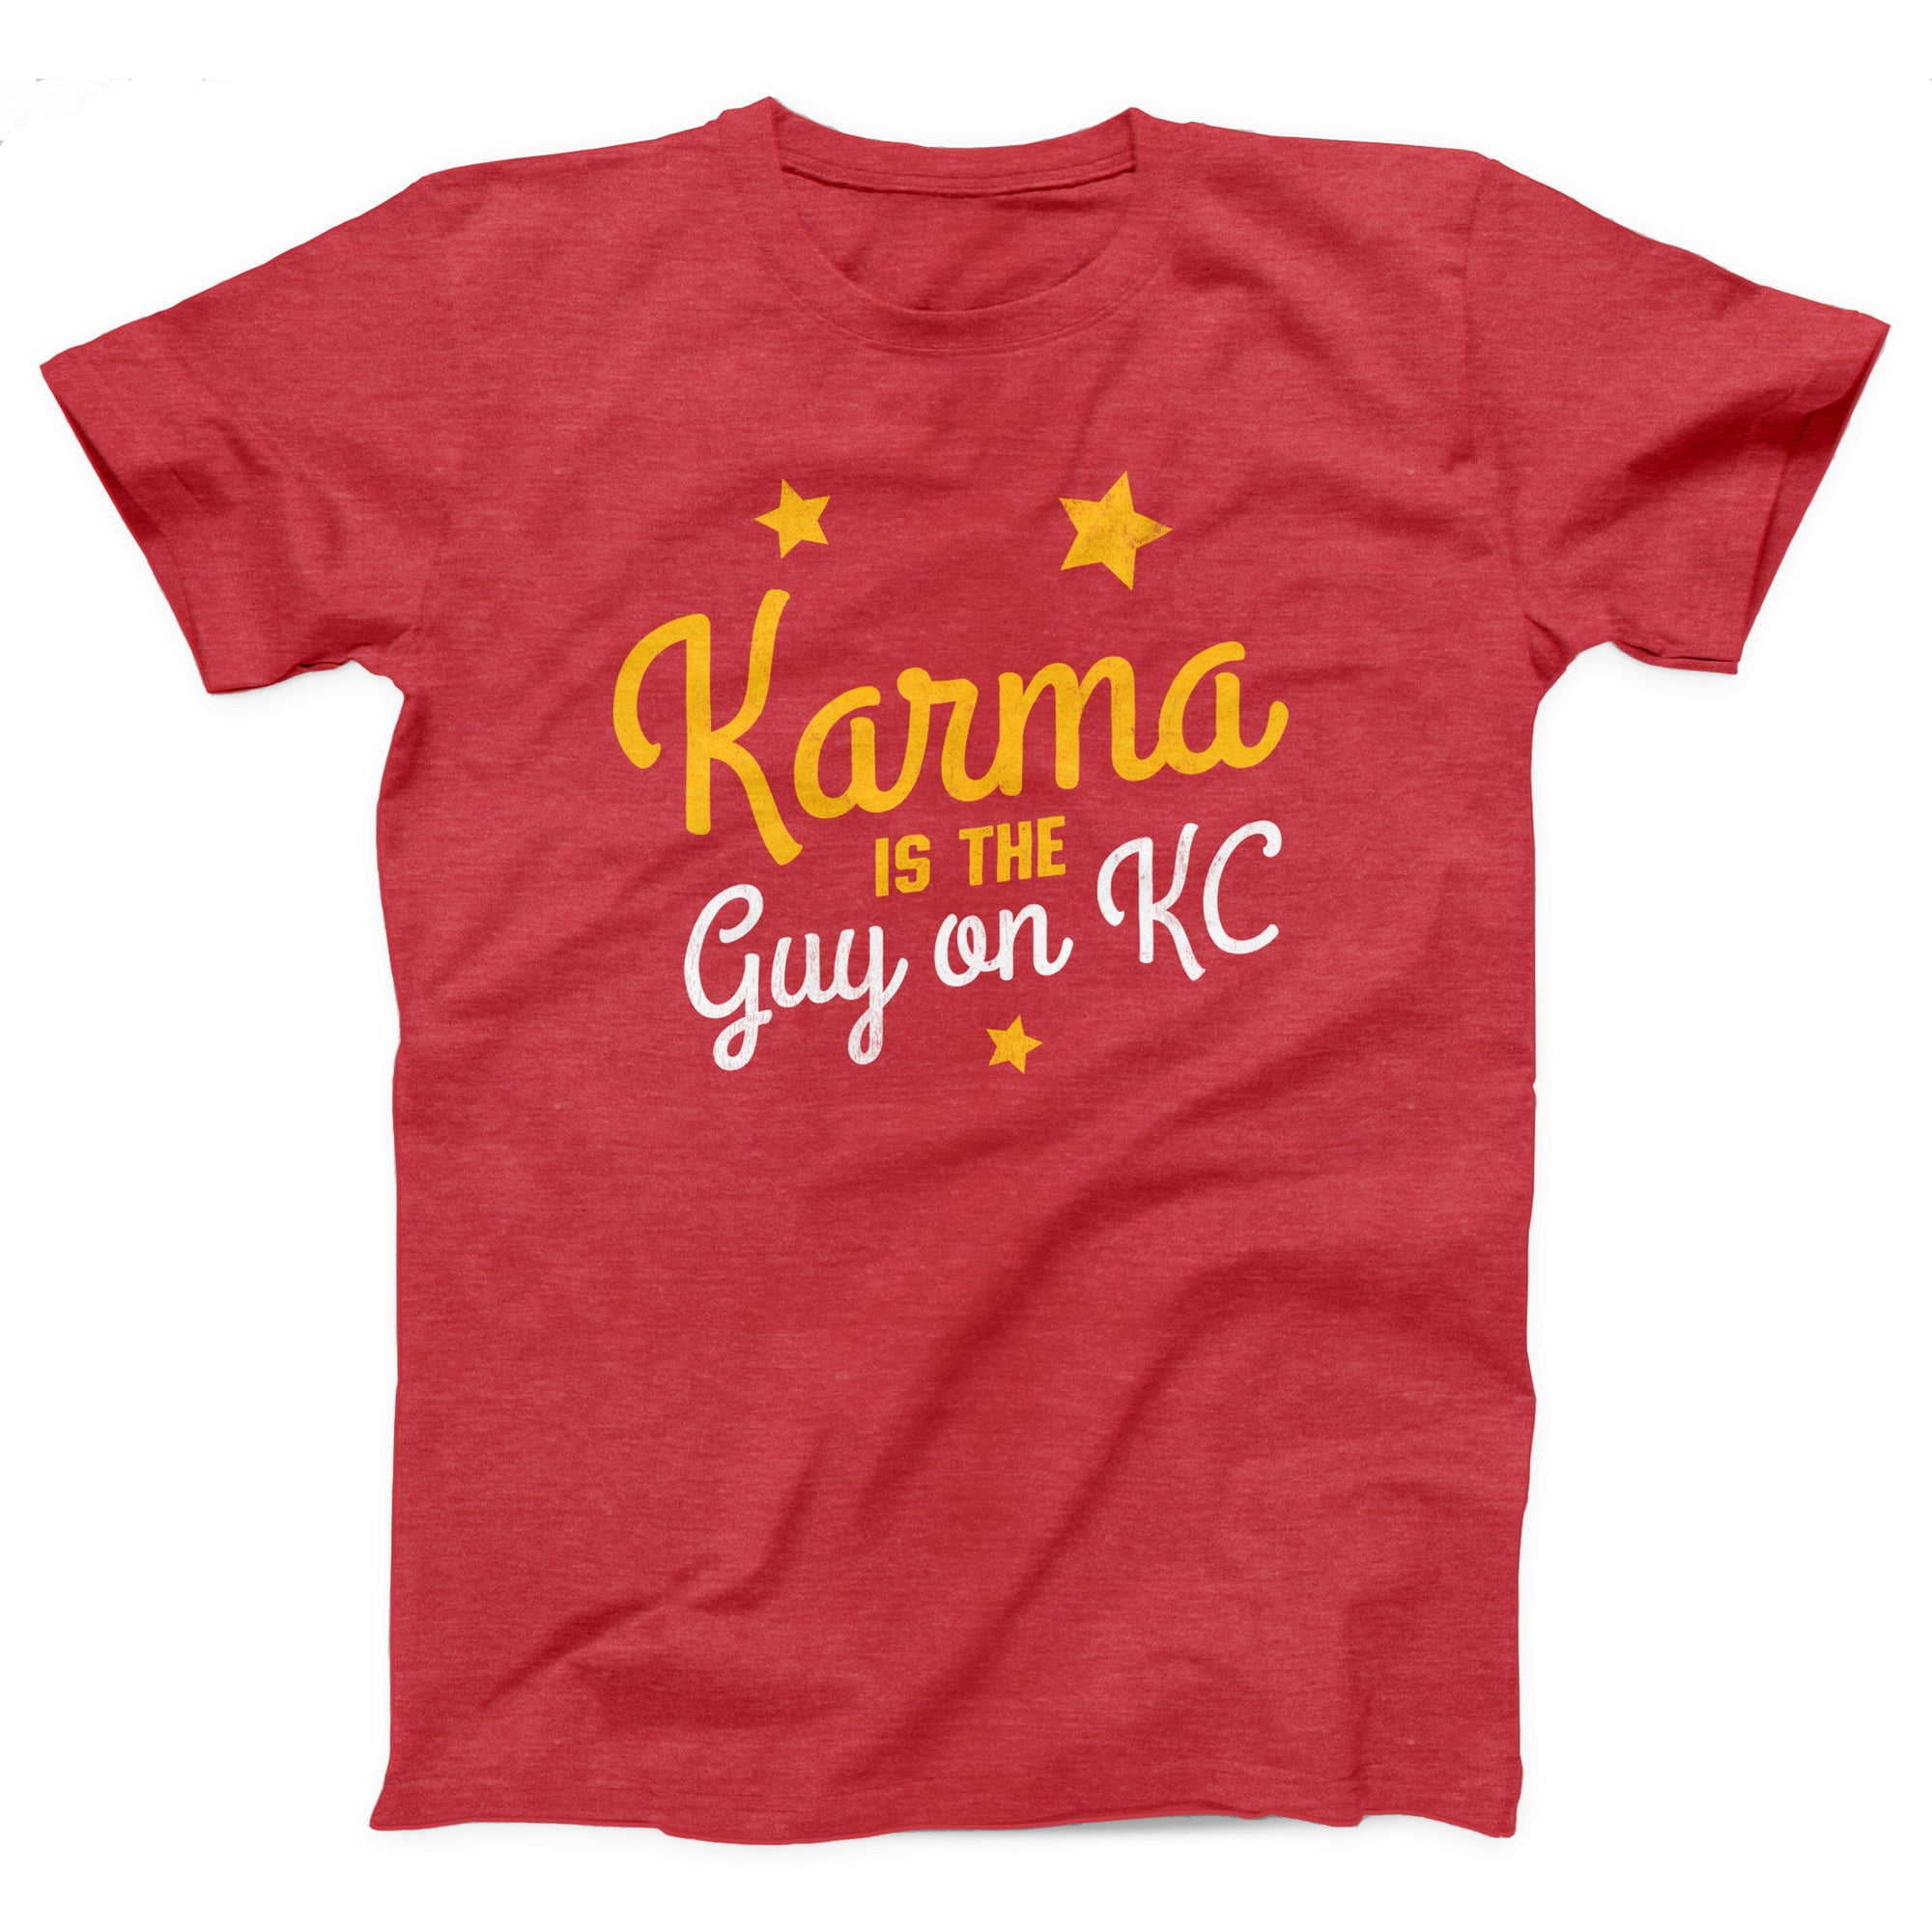 Karma is the Guy on KC Adult Unisex T-Shirt - Twisted Gorilla